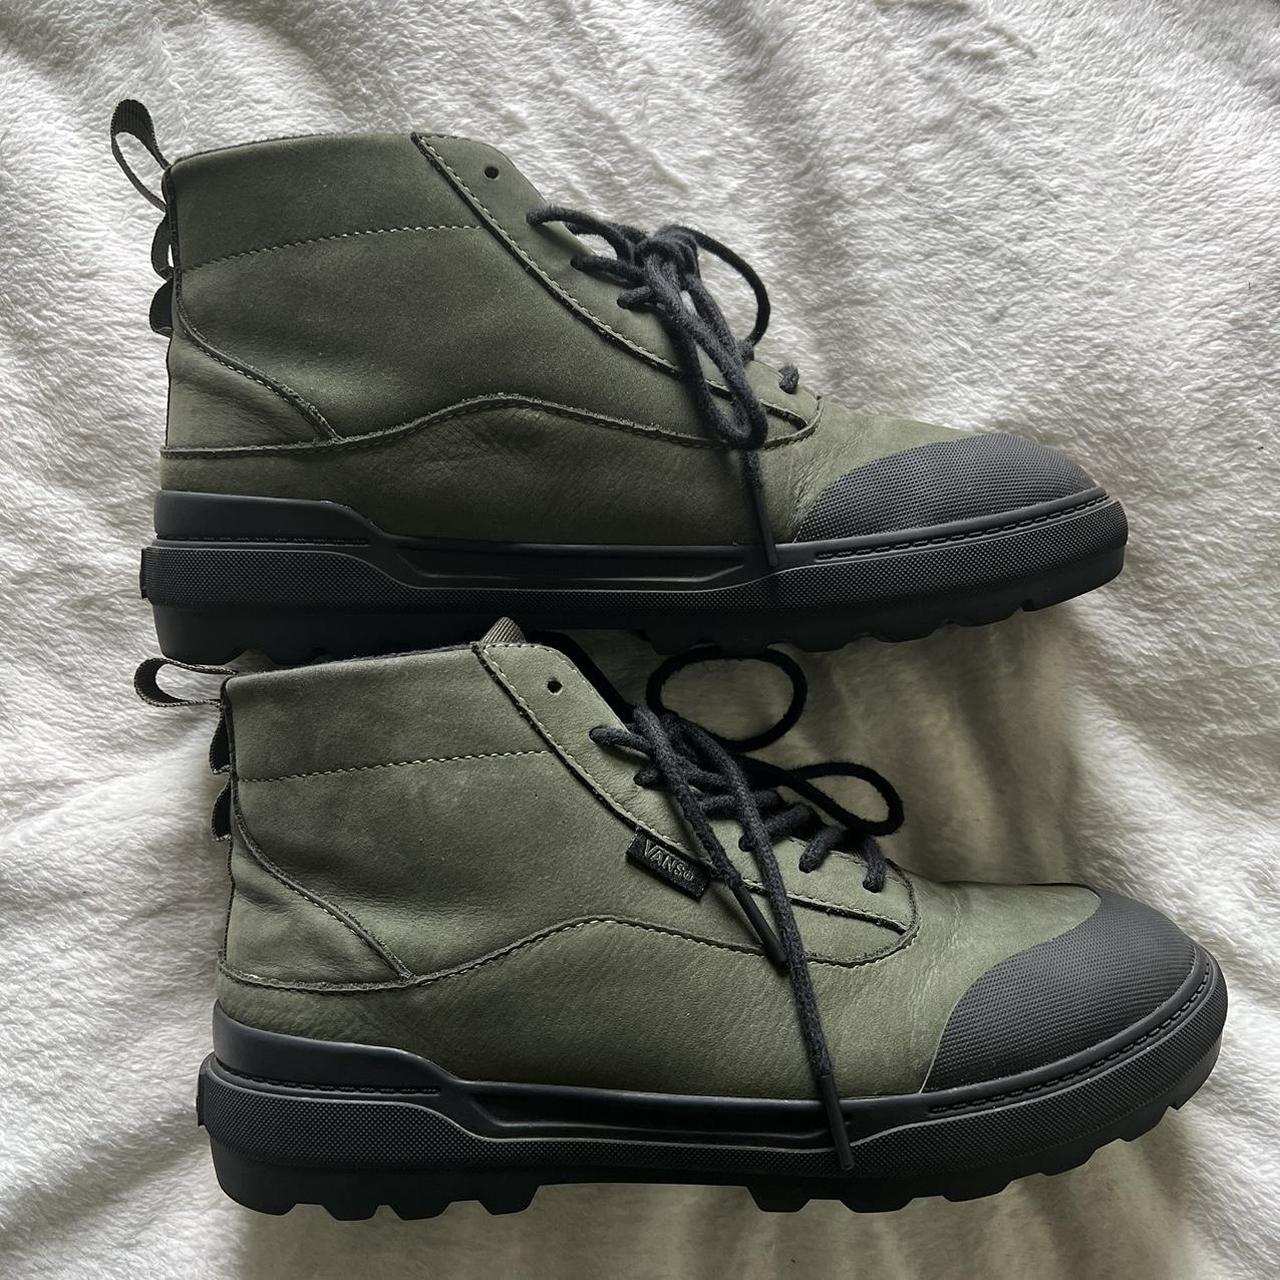 vans boots / hiking boots — worn a few times but in... - Depop